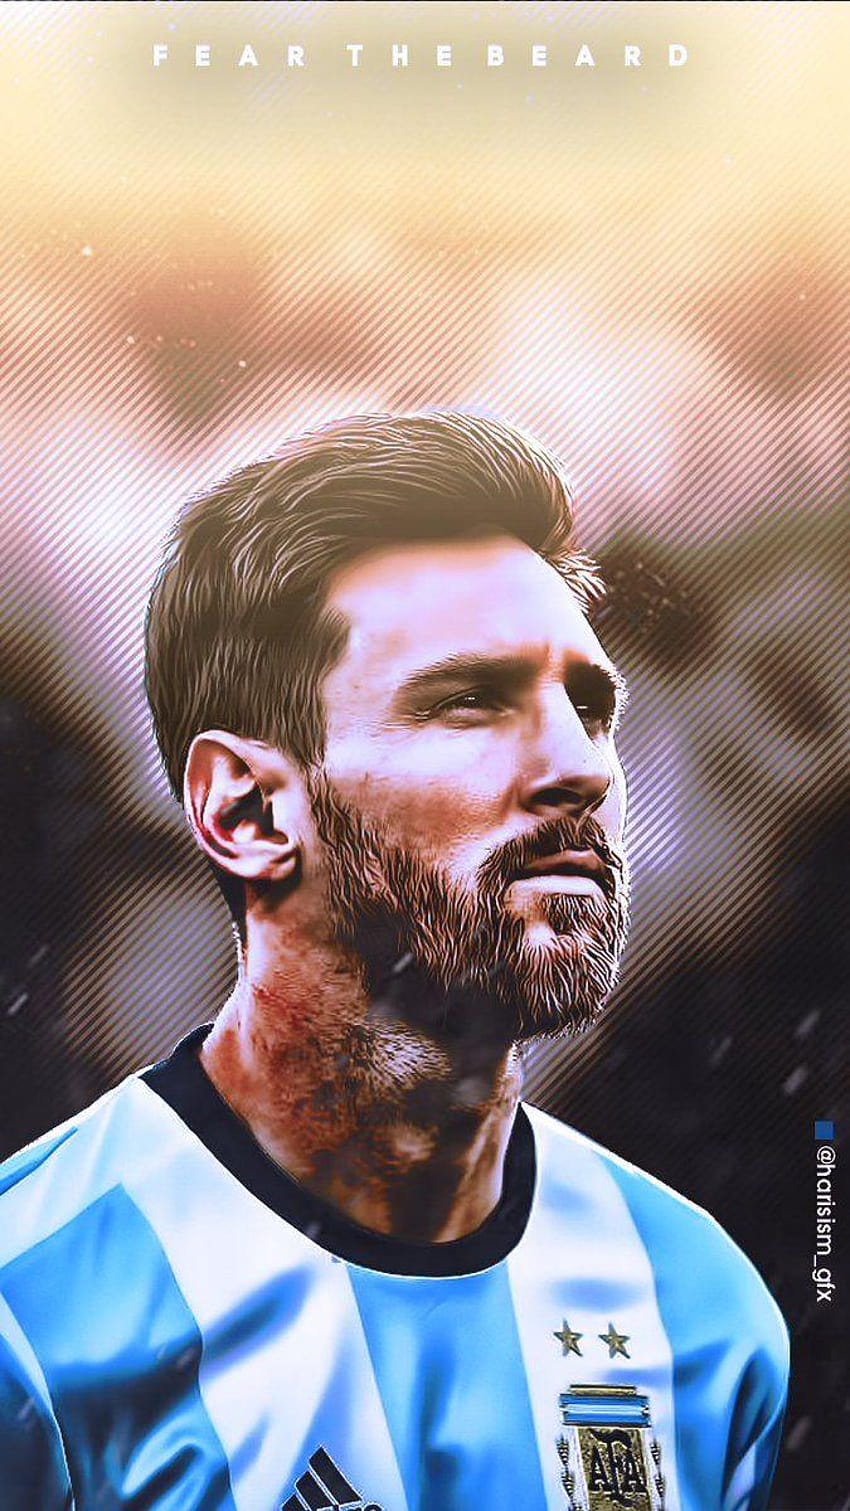 Download wallpapers Lionel Messi Argentina national football team  Argentine football player Messi with cup blue stone background Argentina  football Leo Messi grunge art for desktop free Pictures for desktop free